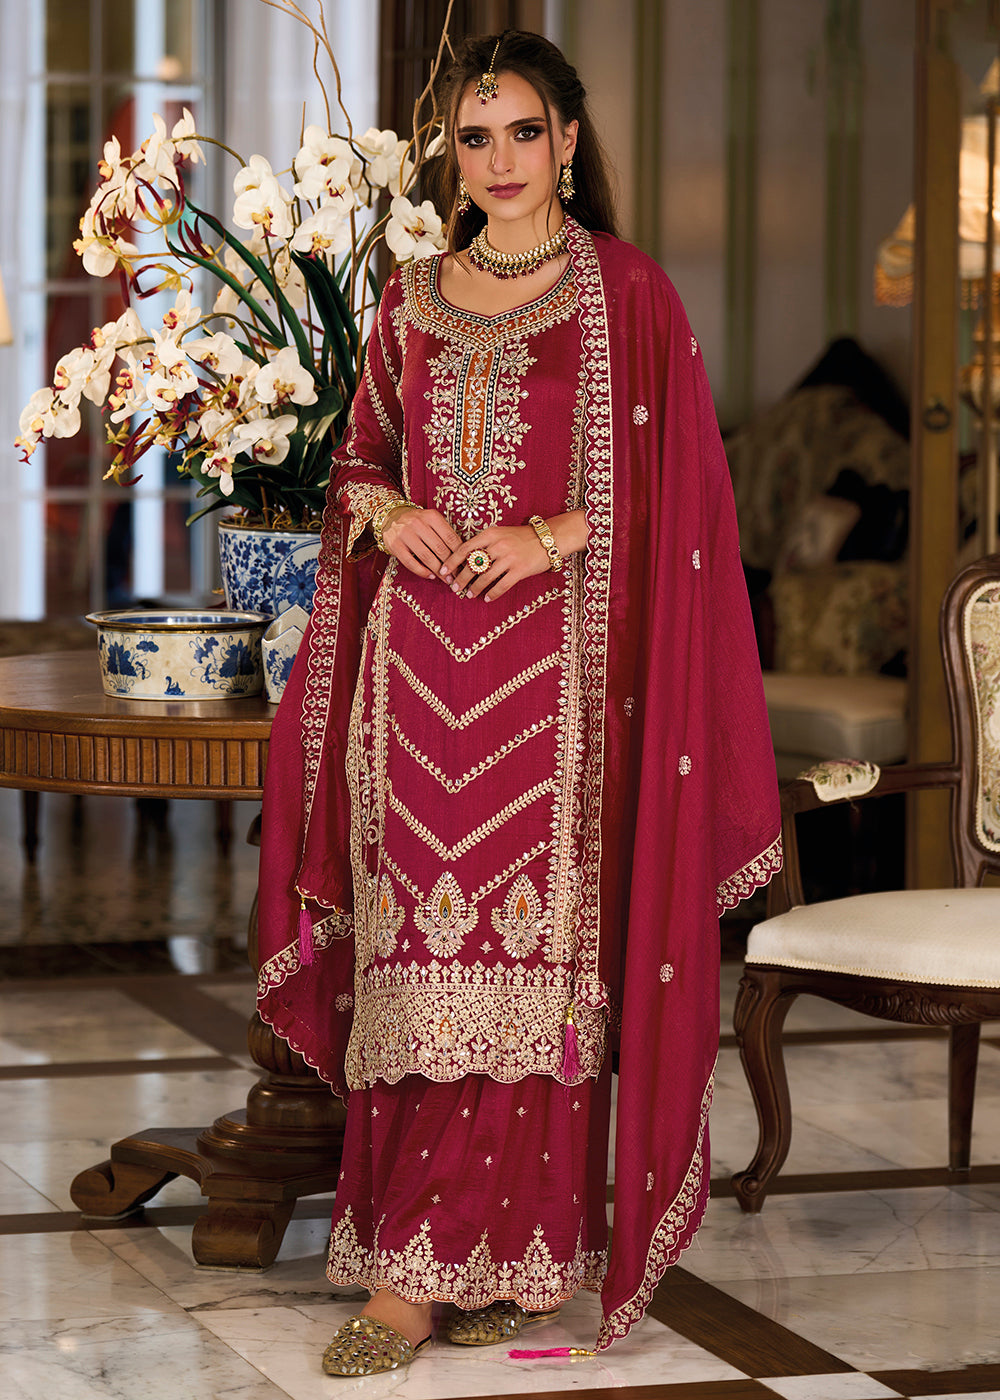 Shop Now Premium Silk Hot Pink Embroidered Wedding Sharara Suit Online at Empress Clothing in USA, UK, Canada, Italy & Worldwide.